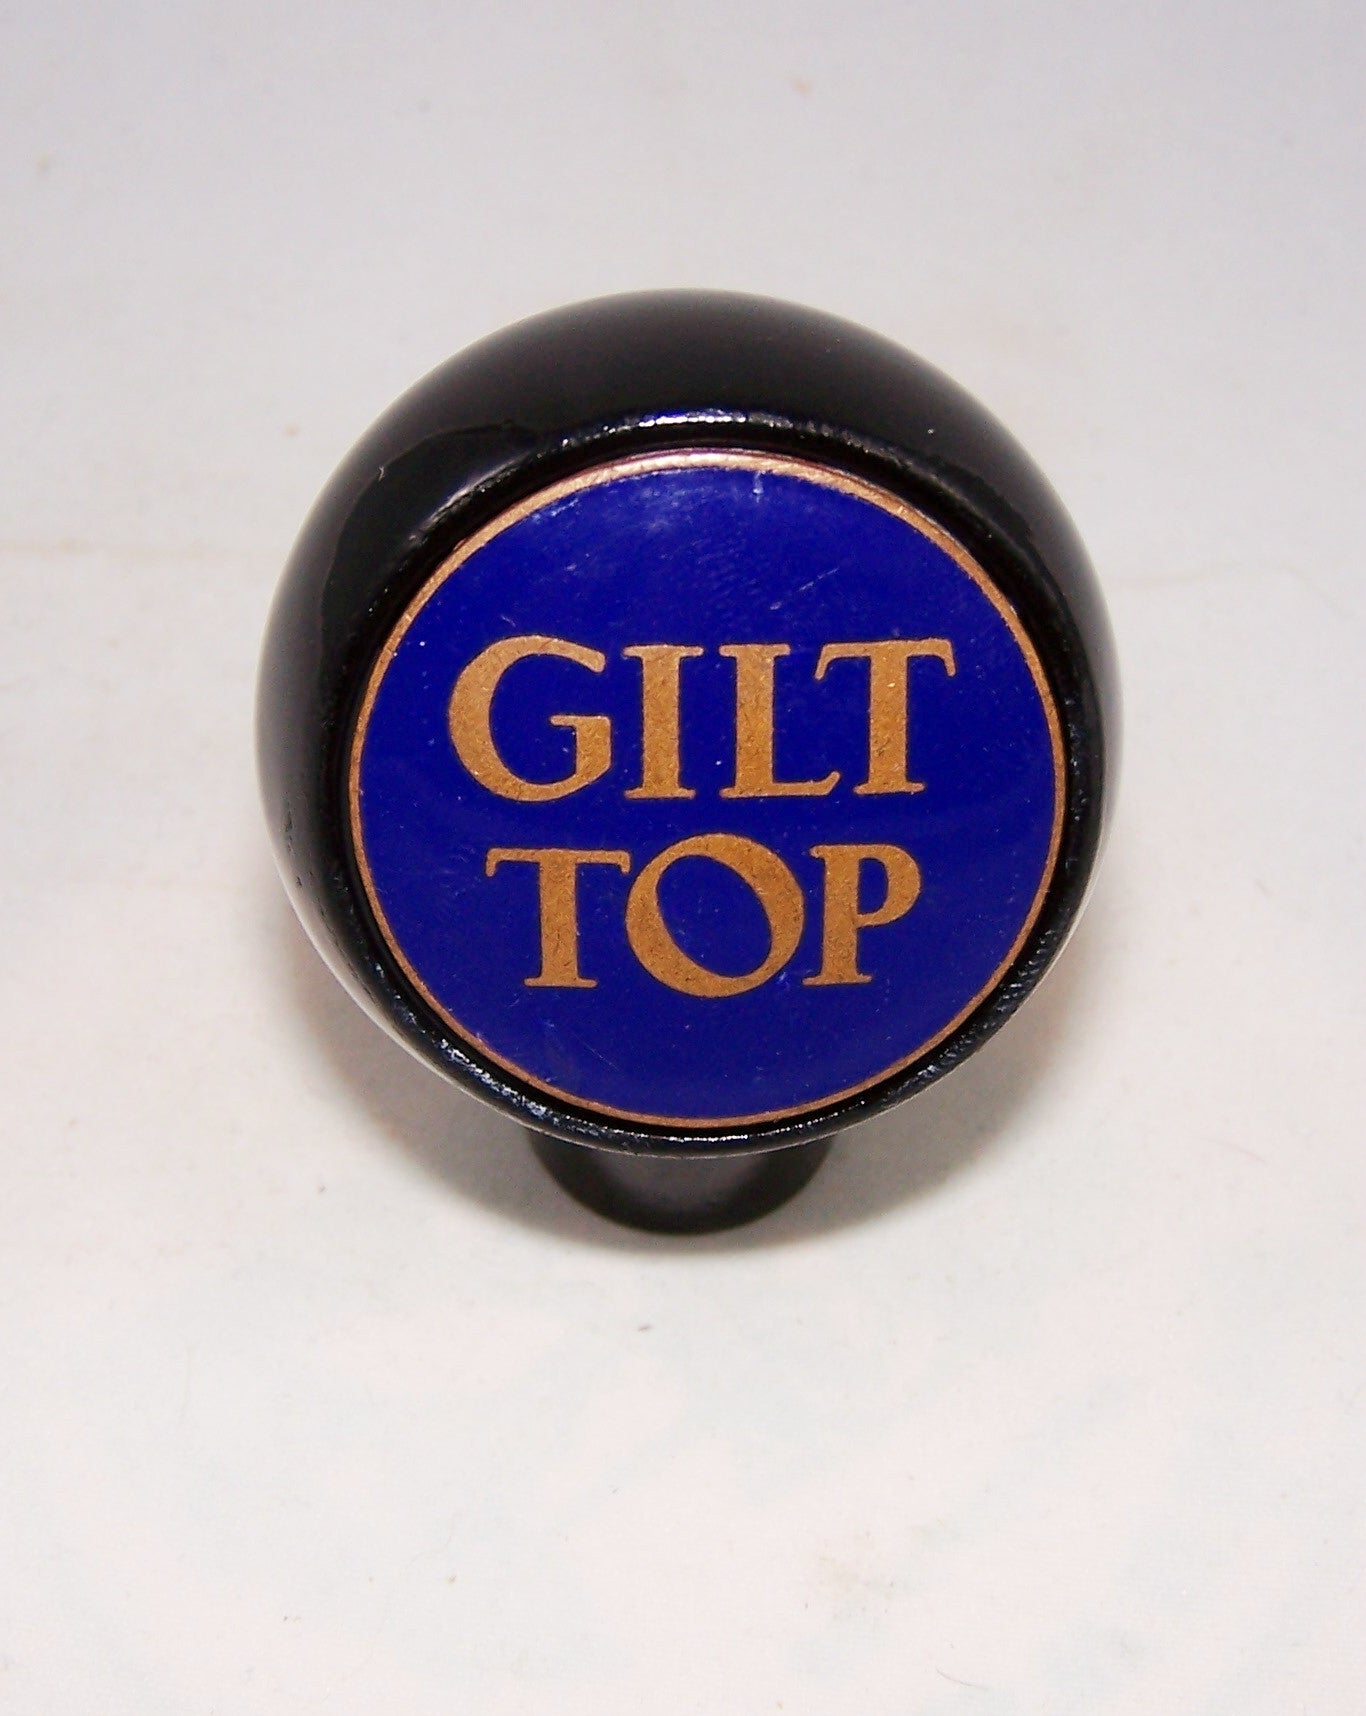 Gilt Top, Tap Markers page 157-1799, Grade 9/9+ Sold on 02/13/16